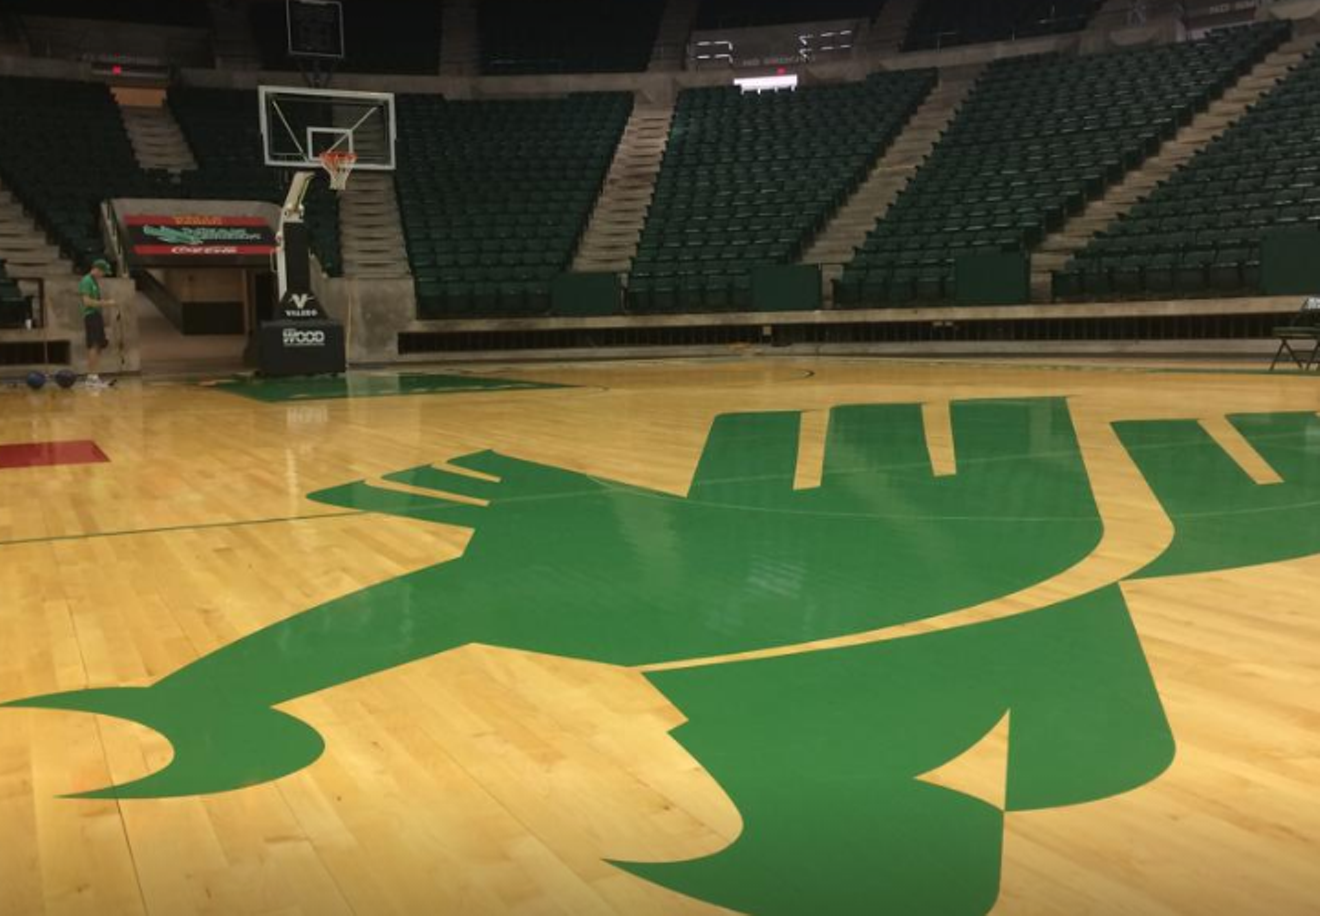 Home court for Mean Green basketball.